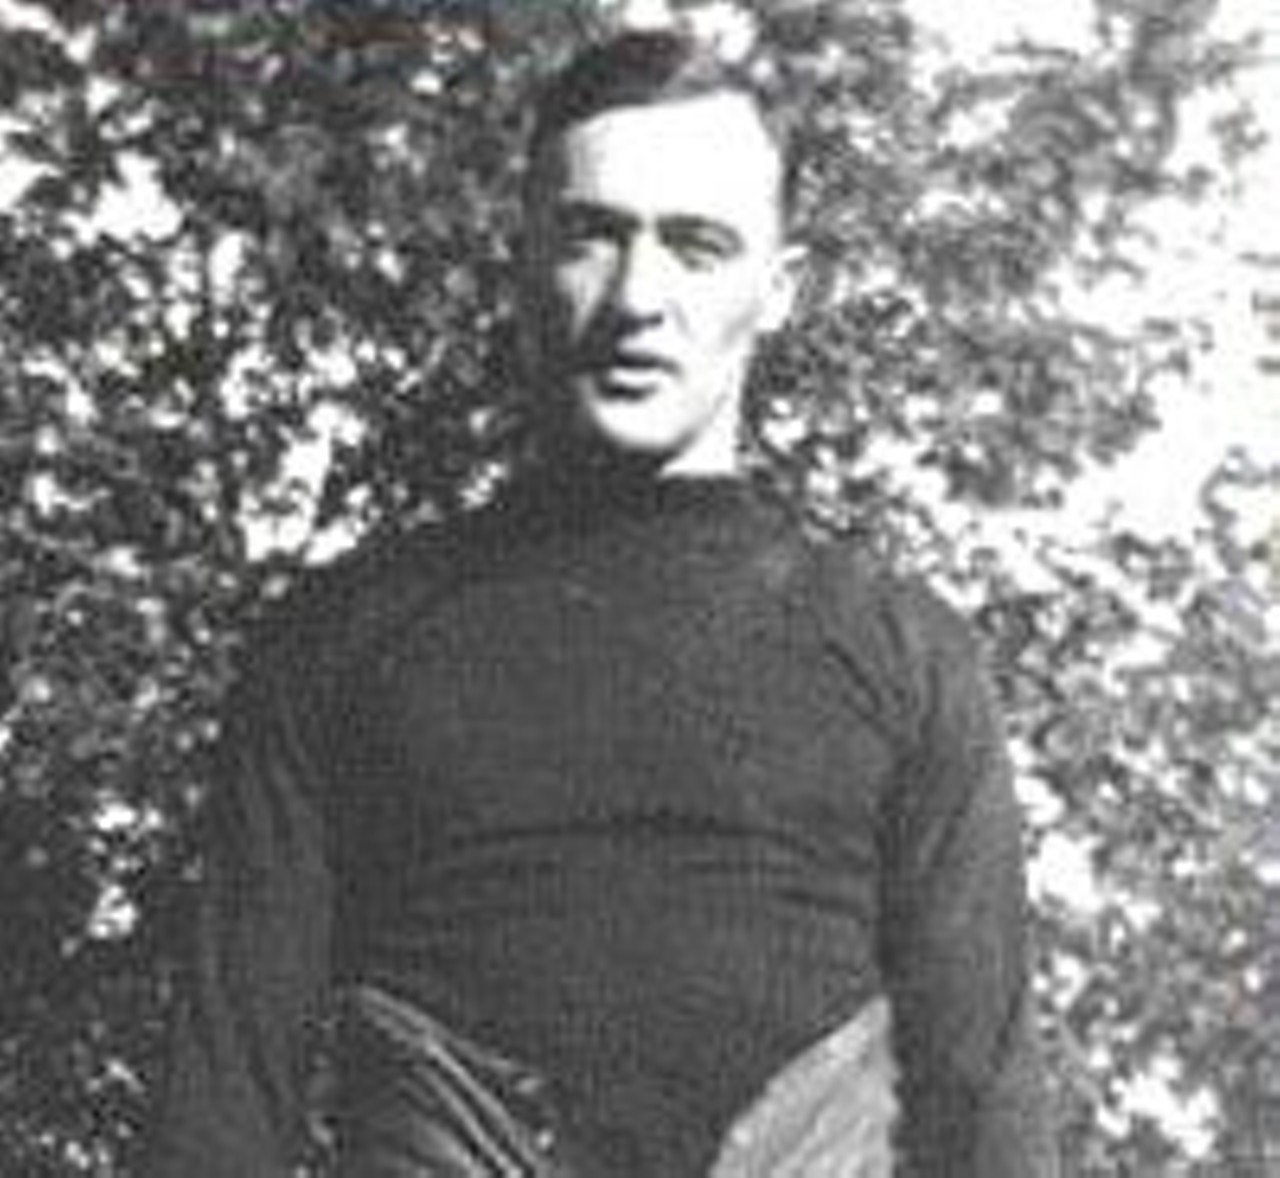 George Gipp
Nicknamed &#147;The Gipper,&#148; George Gipp was a talented football player for Notre Dame University. He still holds a number of records at Notre Dame, including for average yards per rush for a season. In 1920, Gipp died at just 25 years old following a pneumonia infection. He is buried in Lake View Cemetery in Calumet in the Upper Peninsula. 
Photo via Jwalte04 / Wikimedia Commons